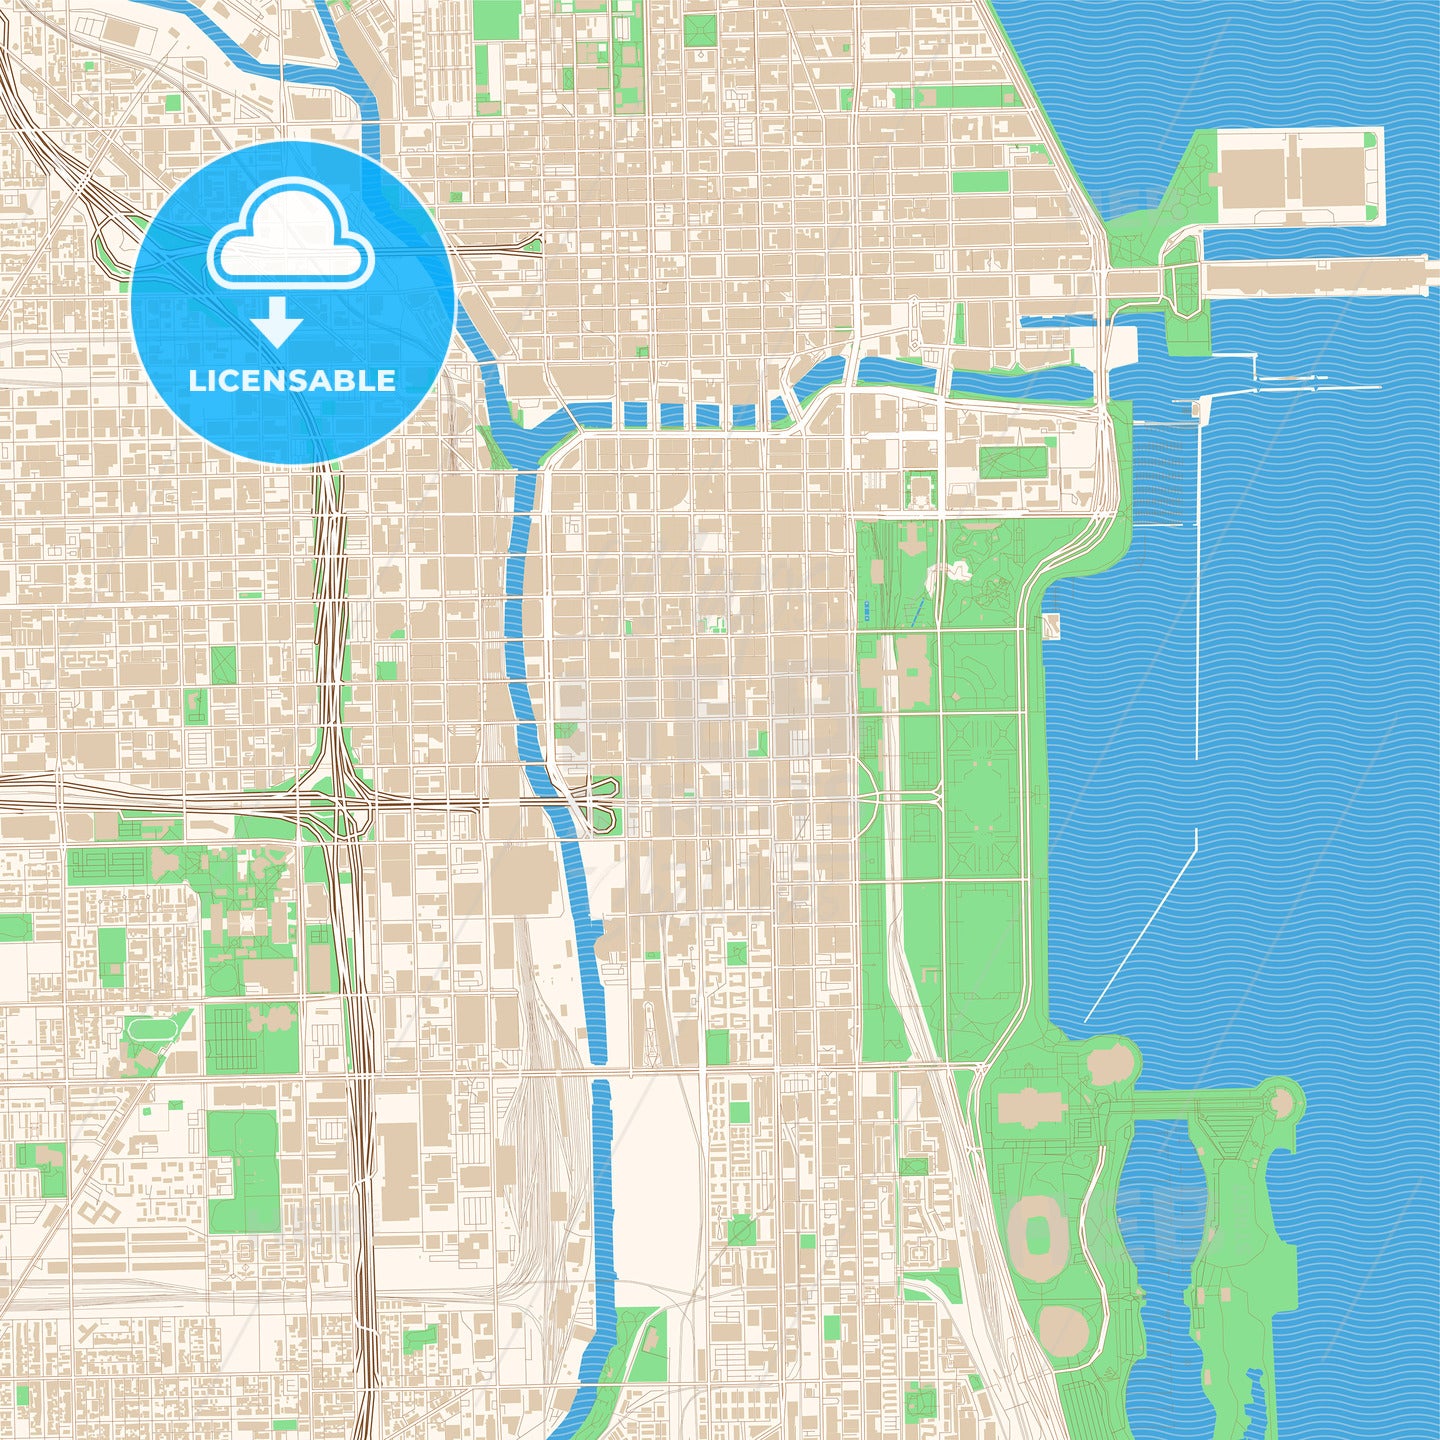 Street map of downtown Chicago, Illinois